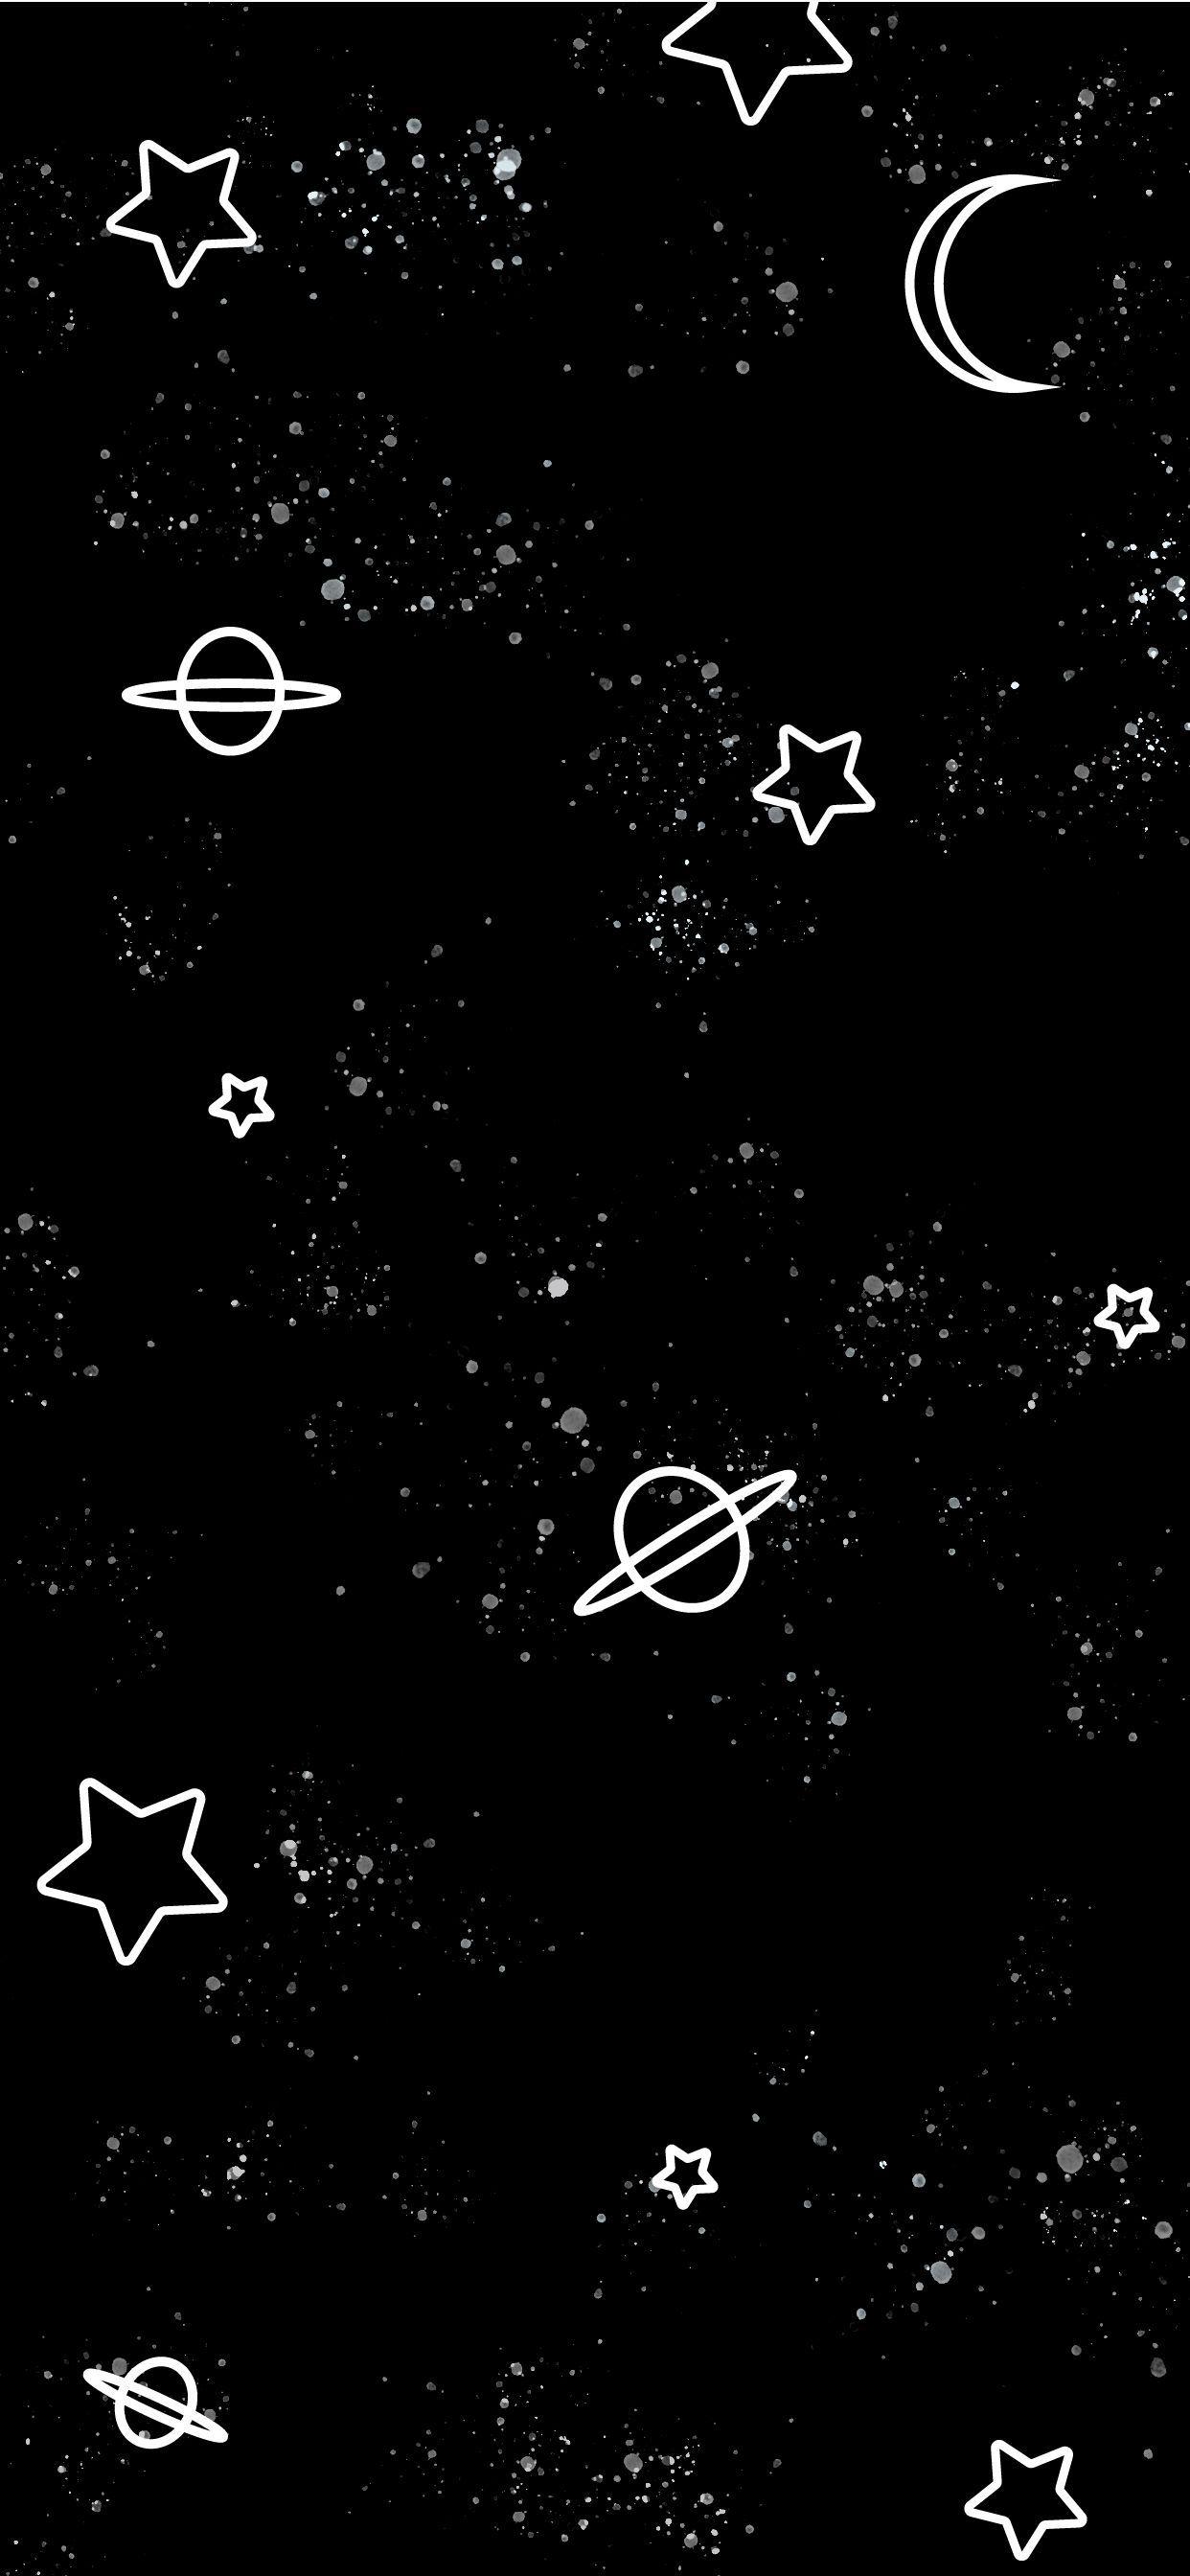 Black and White Space Wallpapers - Top Free Black and White Space ...